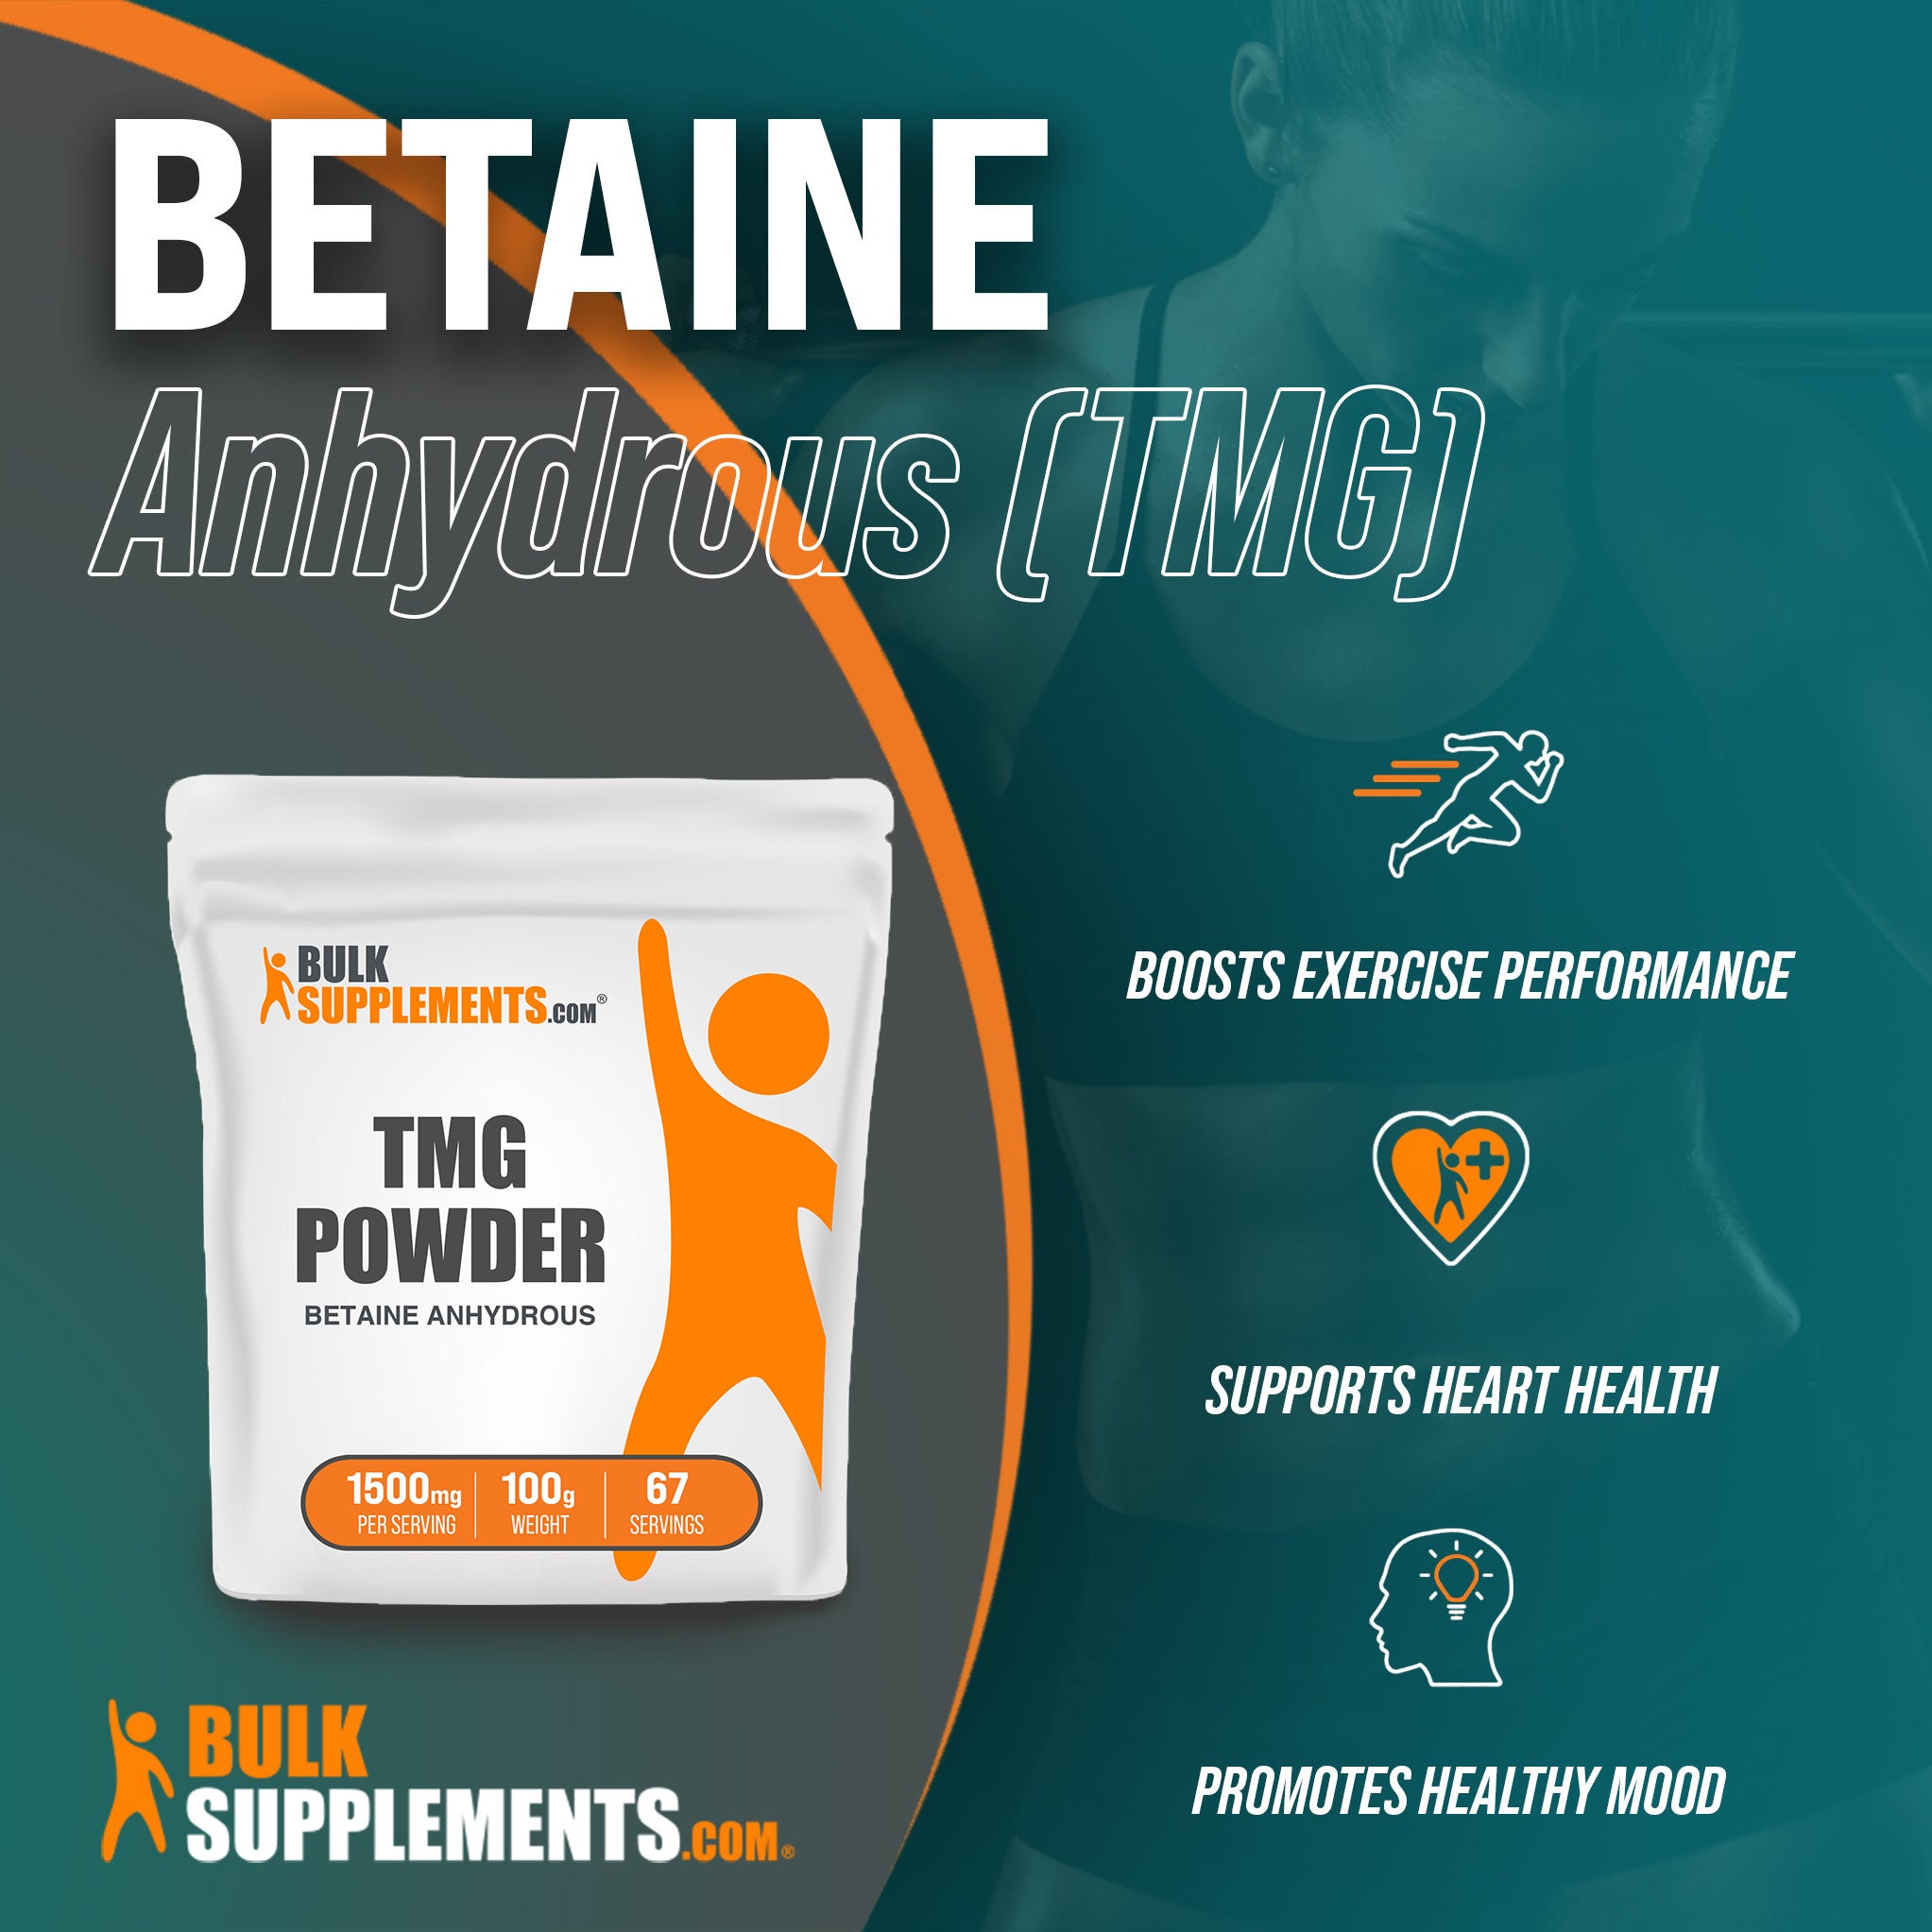 Benefits of Betaine Anhydrous TMG. Boosts Exercise Performance, Supports Heart Health, Promotes Healthy Mood.